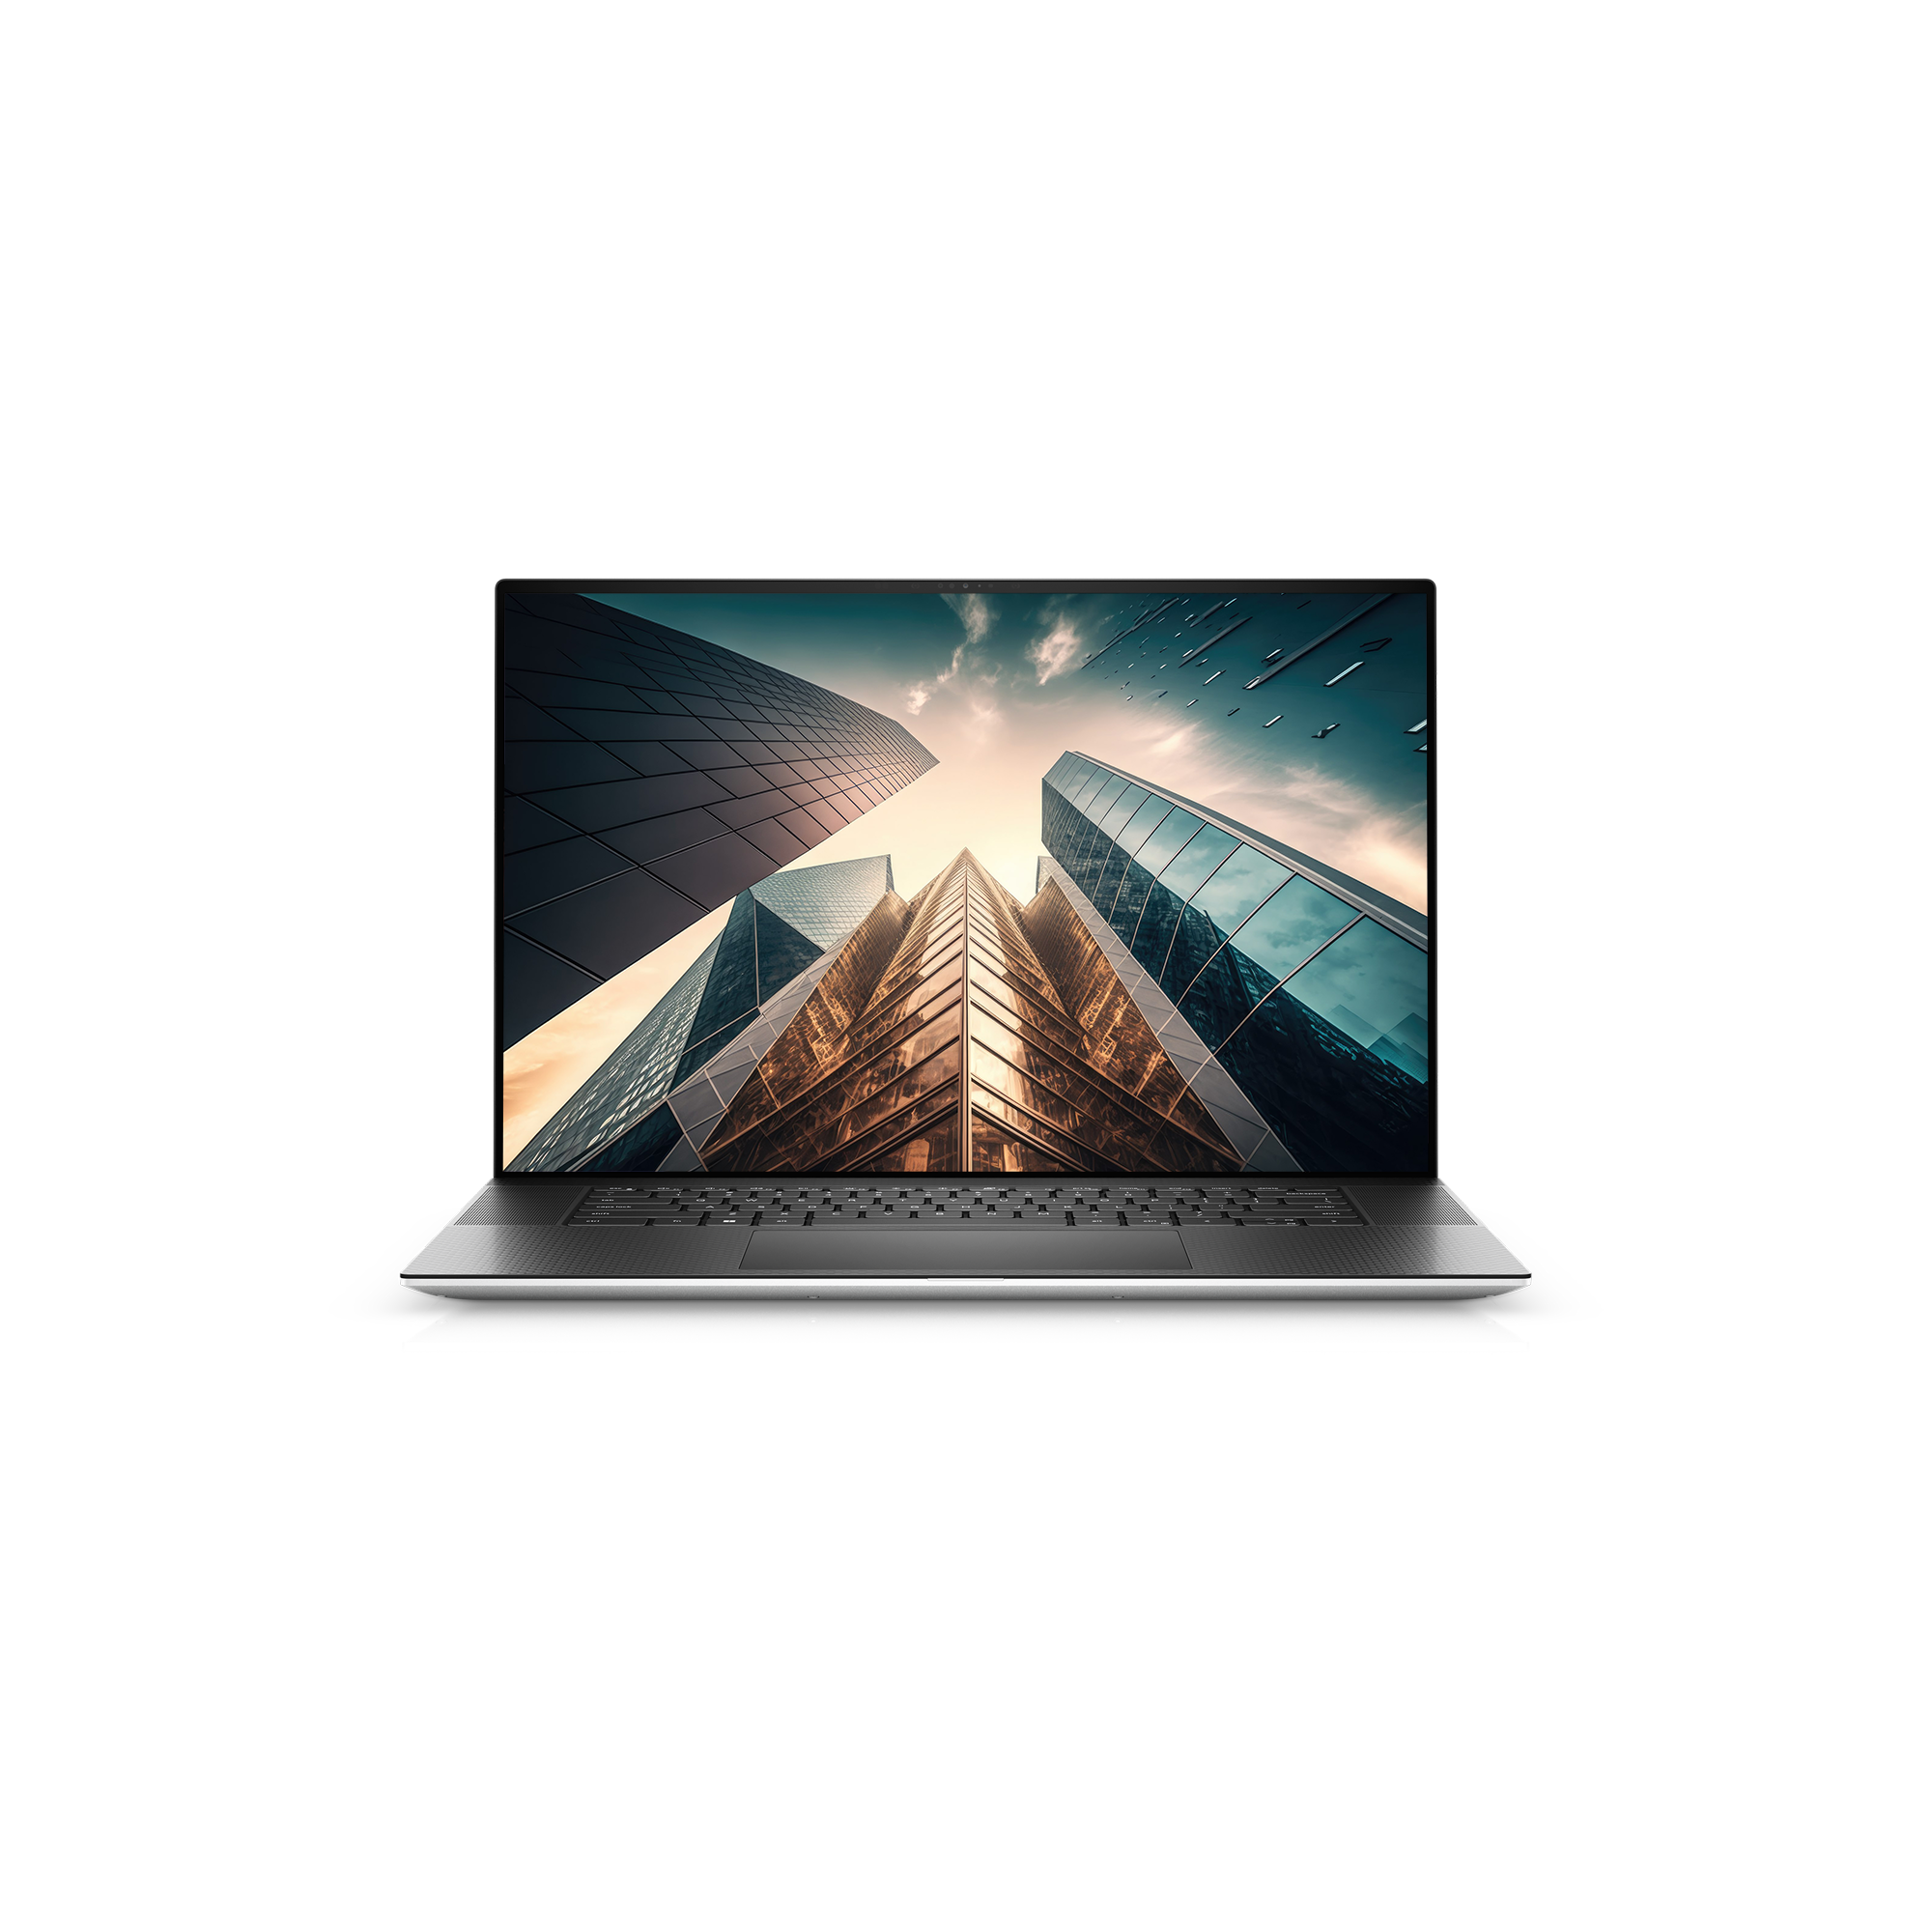 Dell XPS 9730 Laptop, 17" FullHD Display, Intel Core İ7-13700H, NVIDIA GeForce Rtx 4060, Backlit Keyboard, Windows 11 Home, Platinum Silver